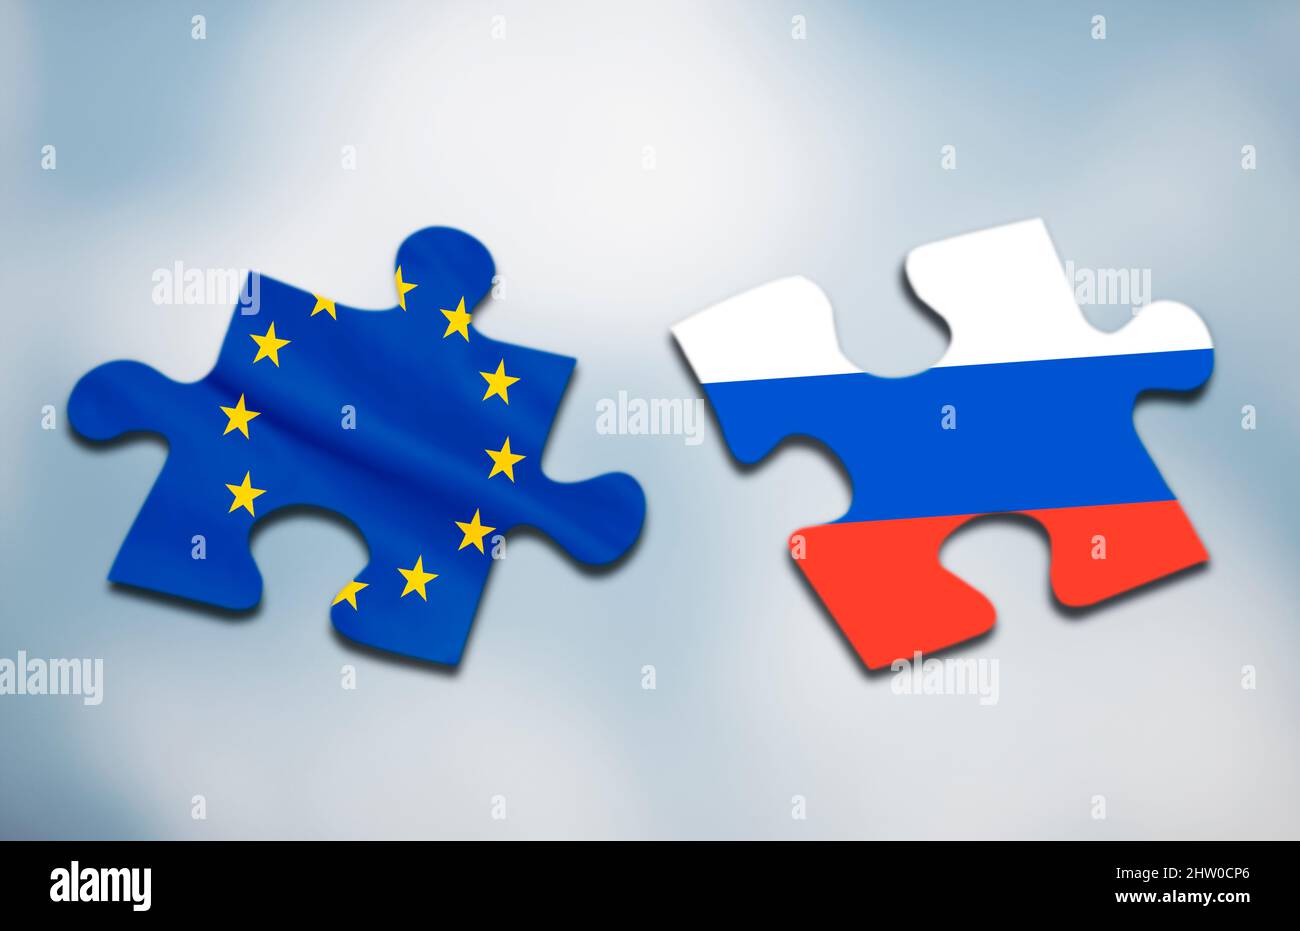 Two puzzle pieces with flags of Europe and Russia on abstract background Stock Photo